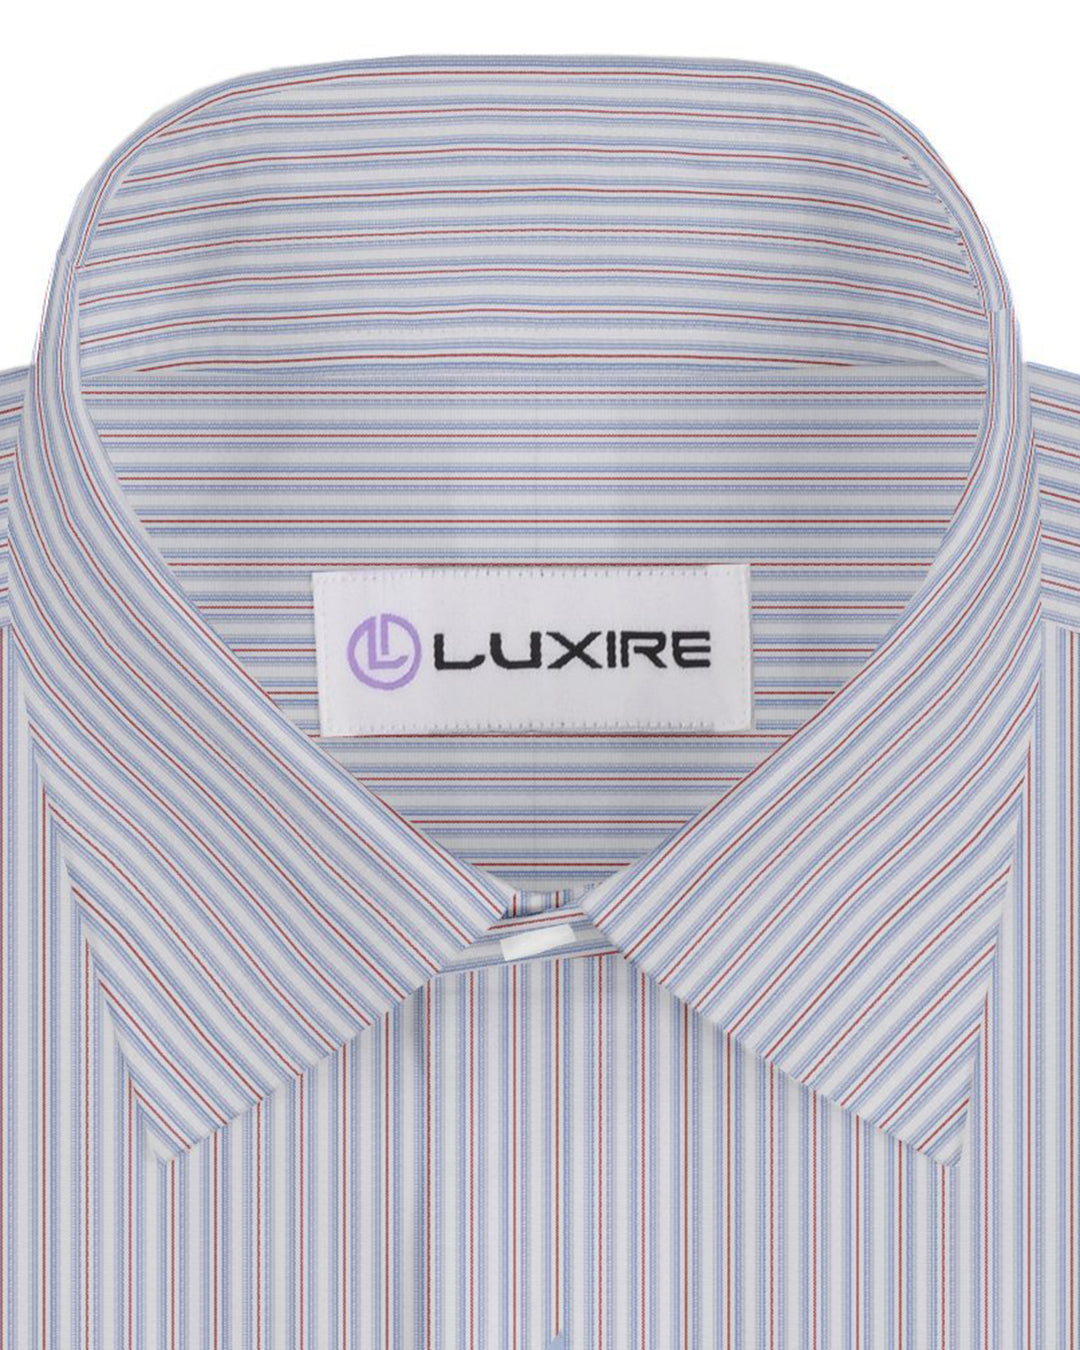 Collar of the custom linen shirt for men in grey with blue and red stripes by Luxire Clothing